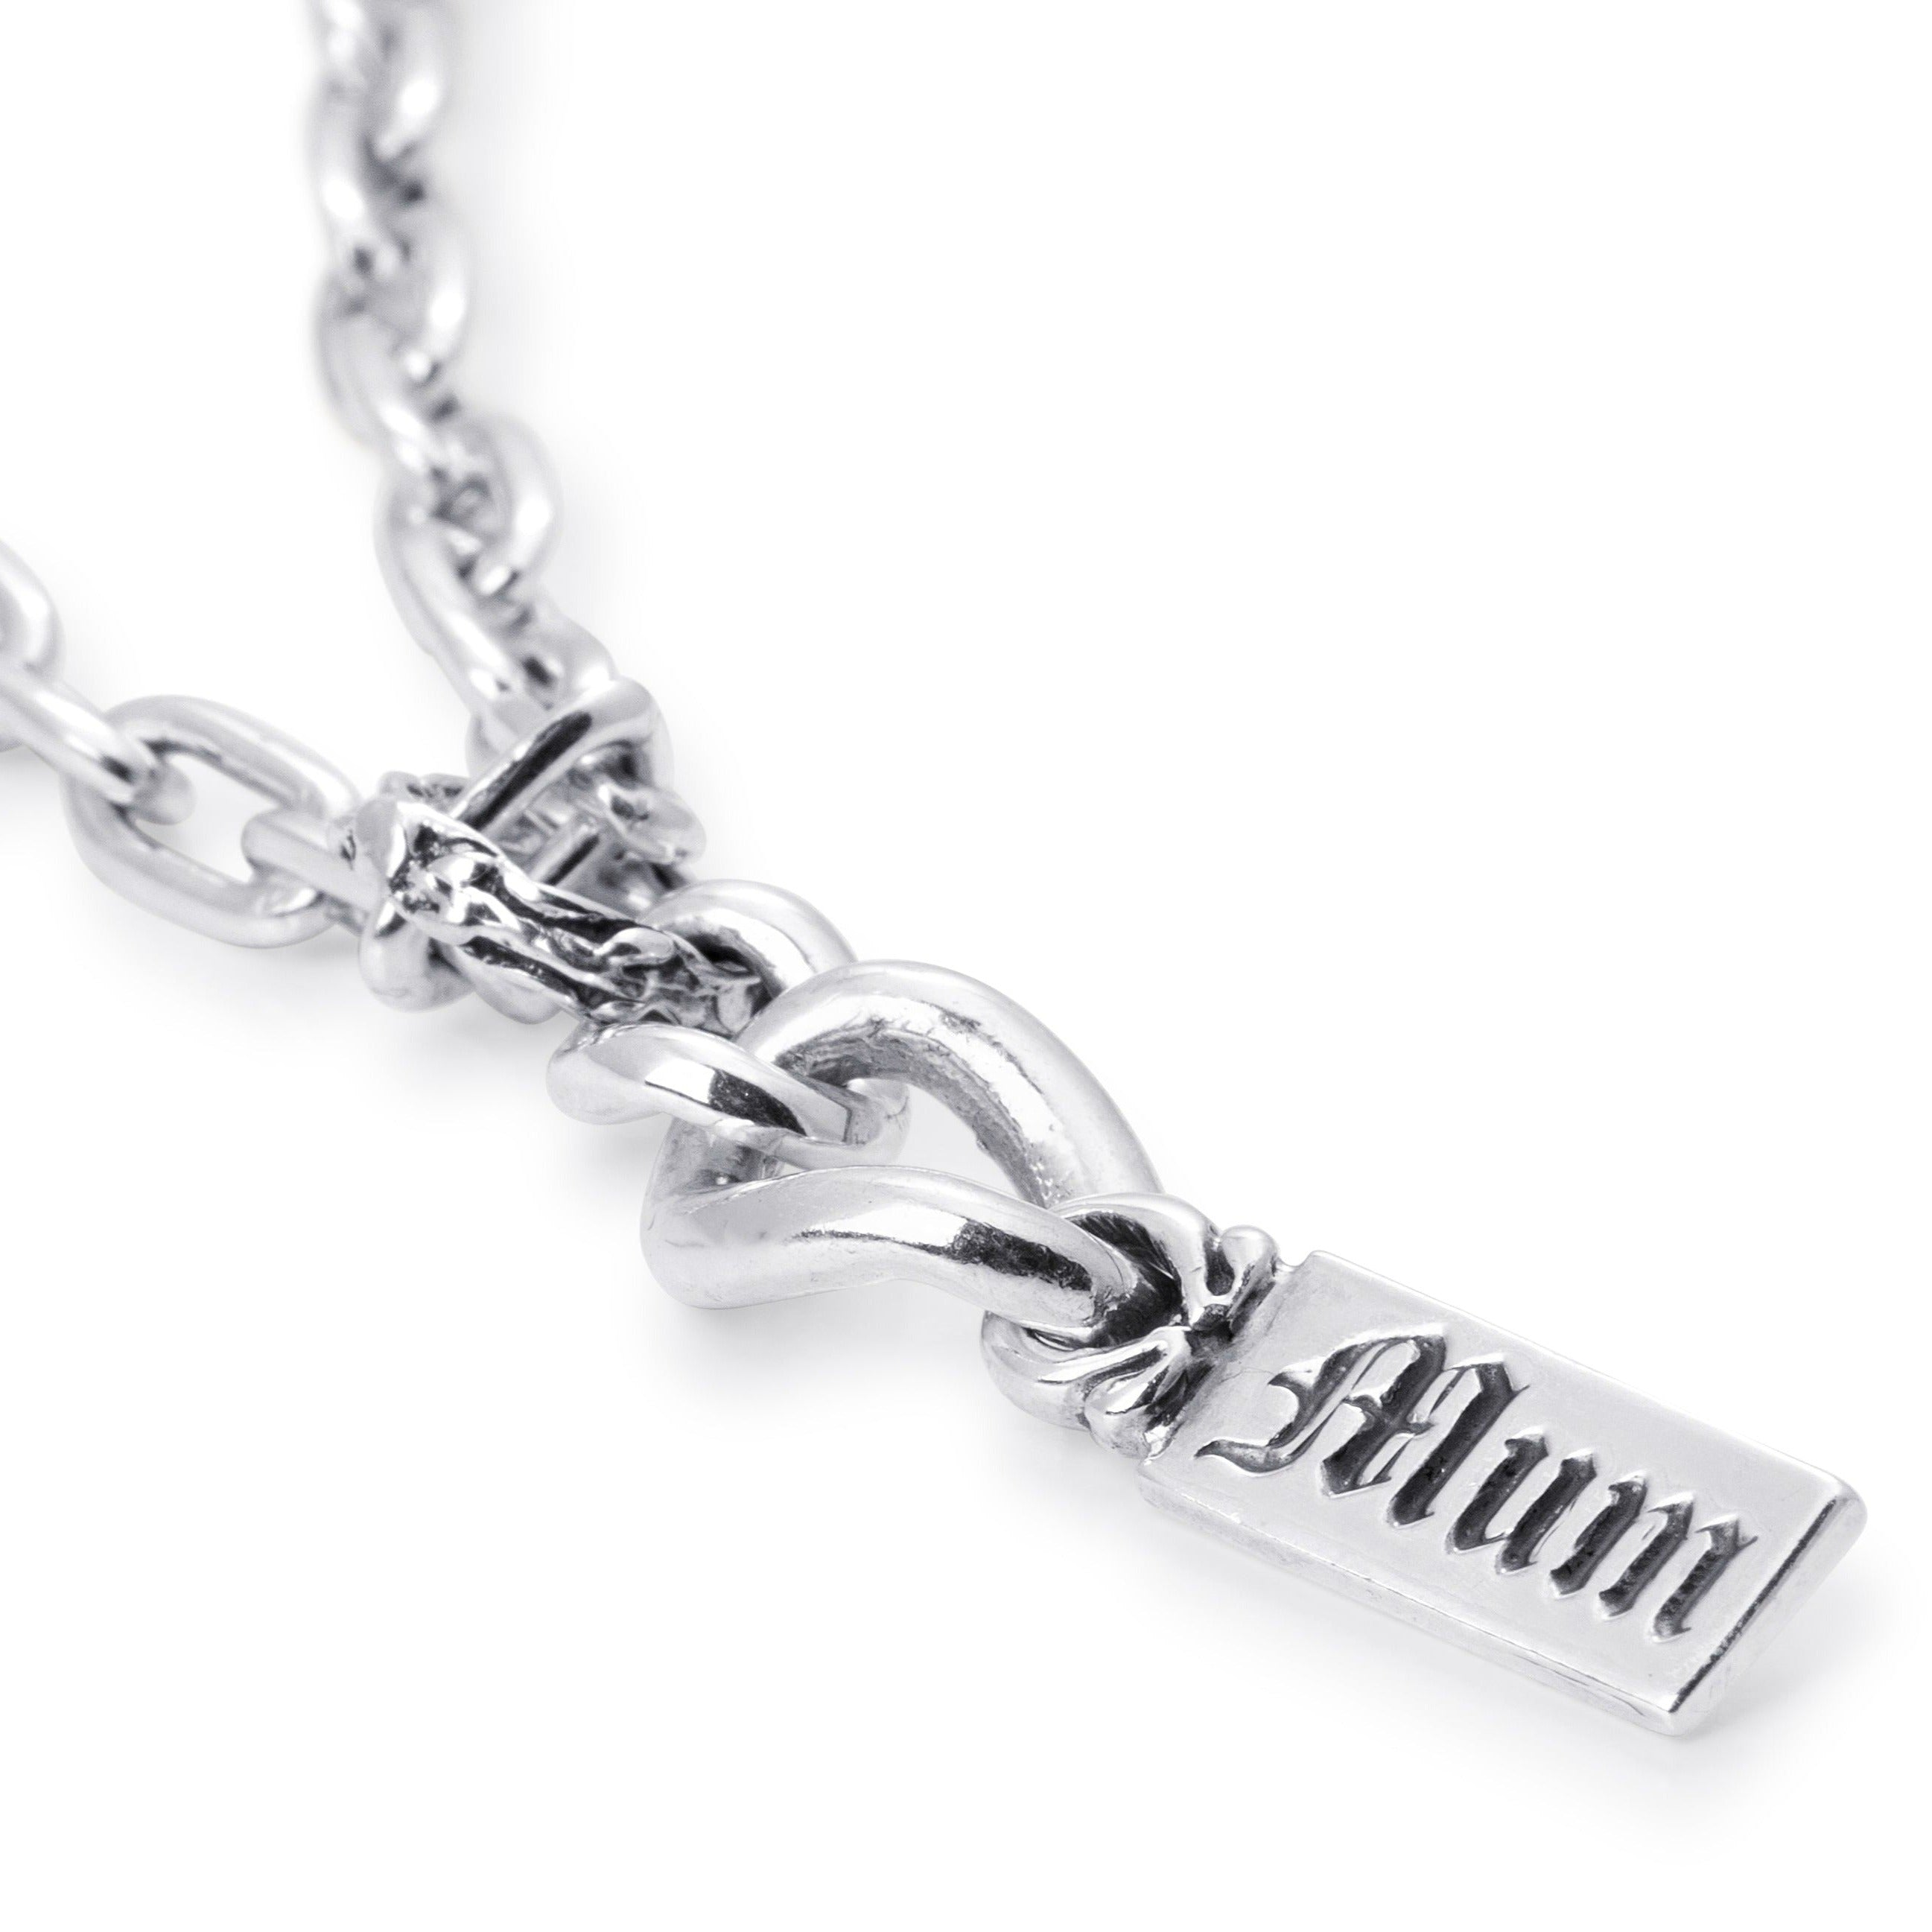 'Mum' Word Bar Pendant in Sterling Silver, 38mm